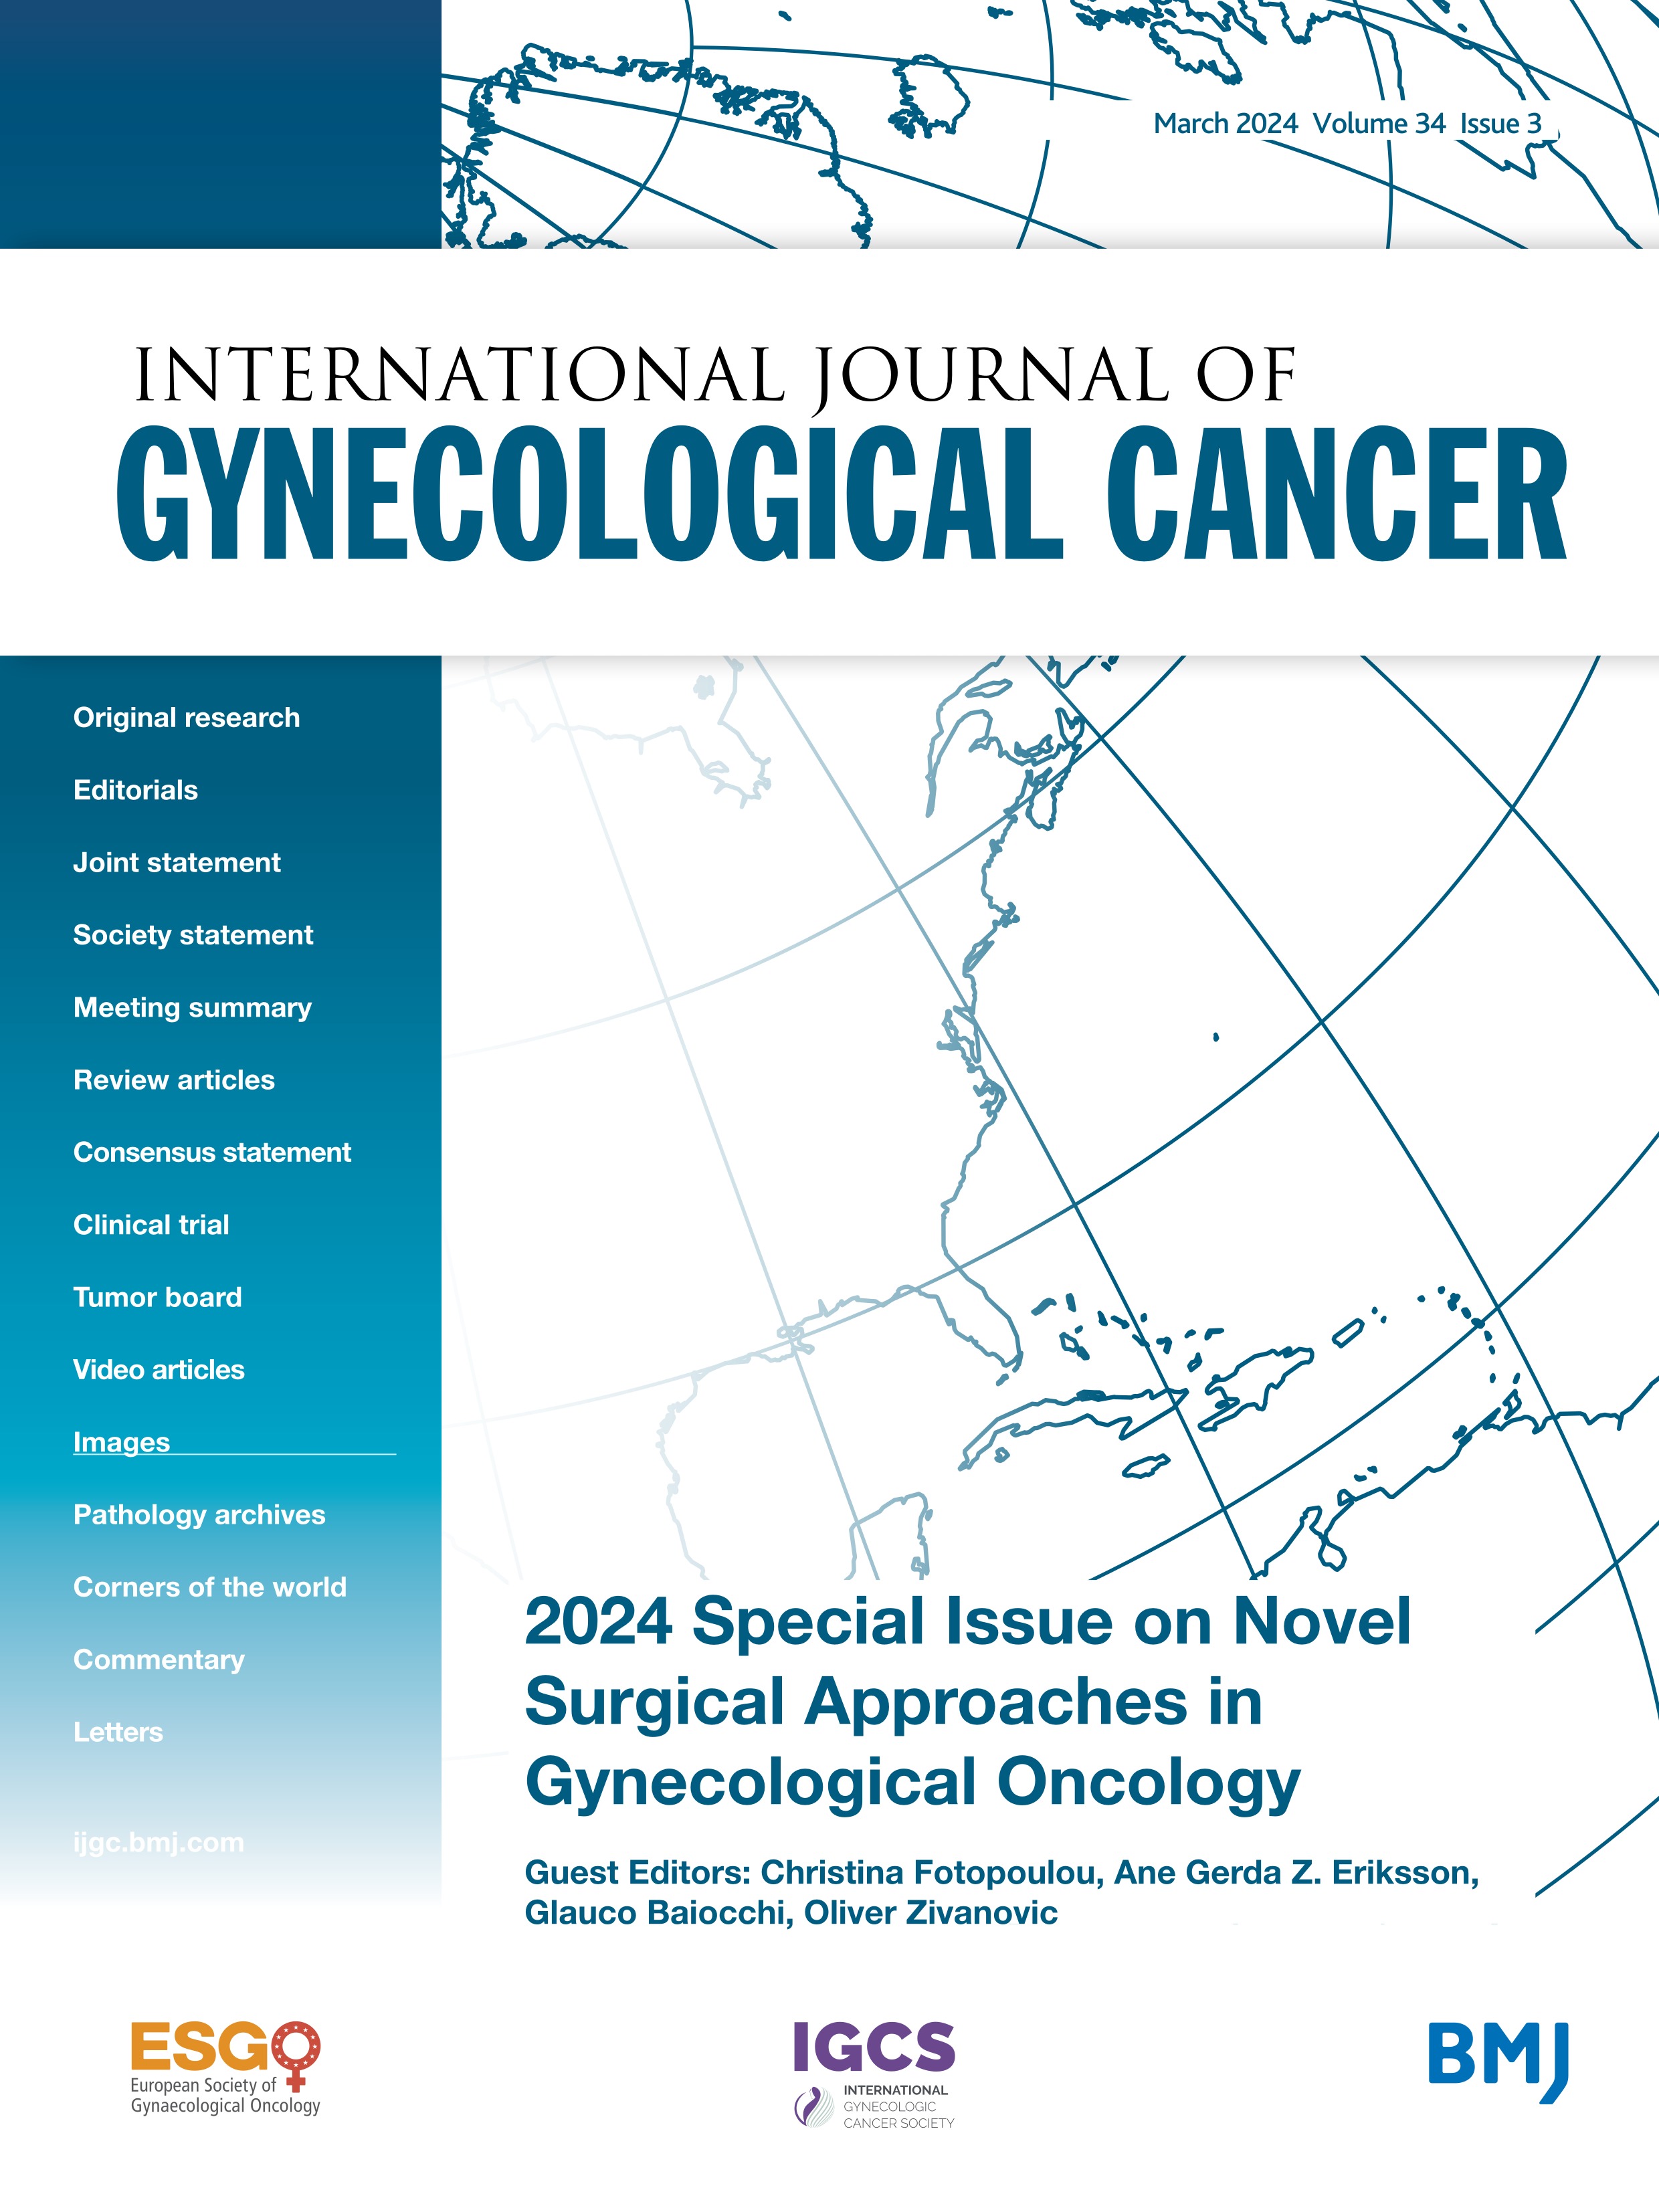 Update on near infrared imaging technology: indocyanine green and near infrared technology in the treatment of gynecologic cancers